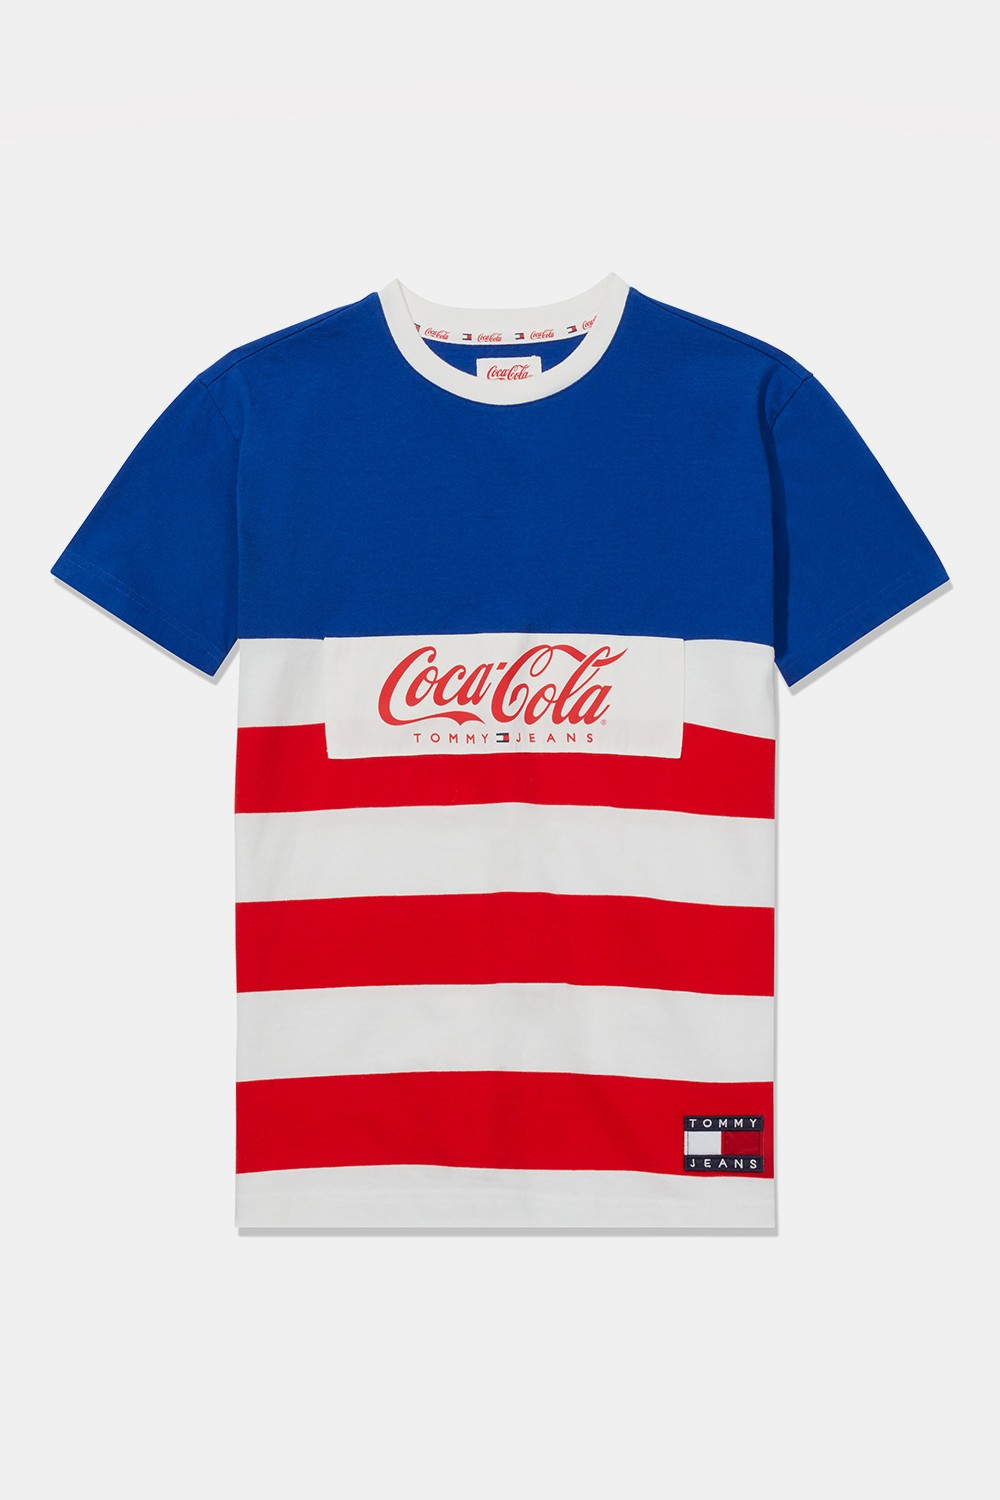 tommy jeans coca cola